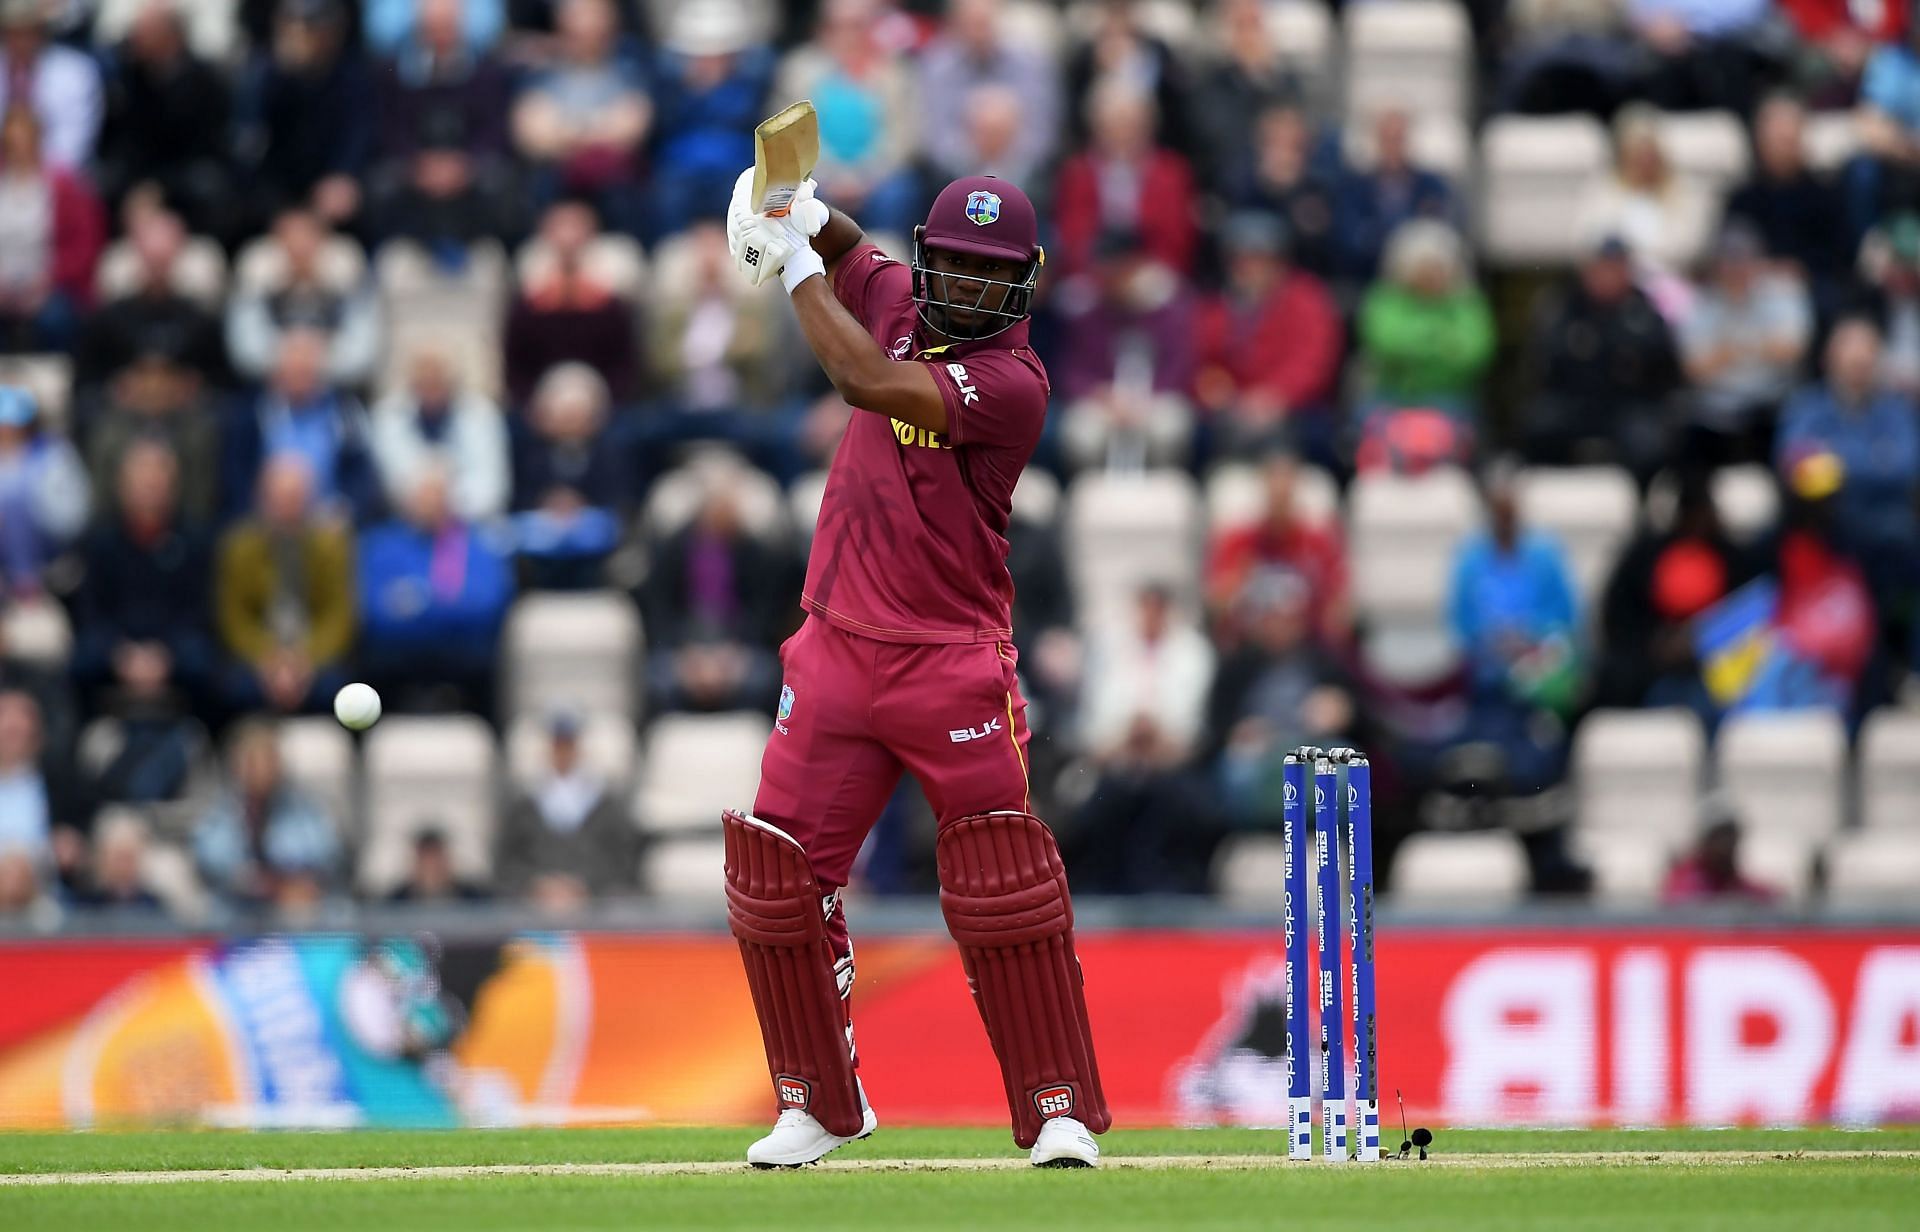 Evin Lewis has two T20I centuries to his credit.